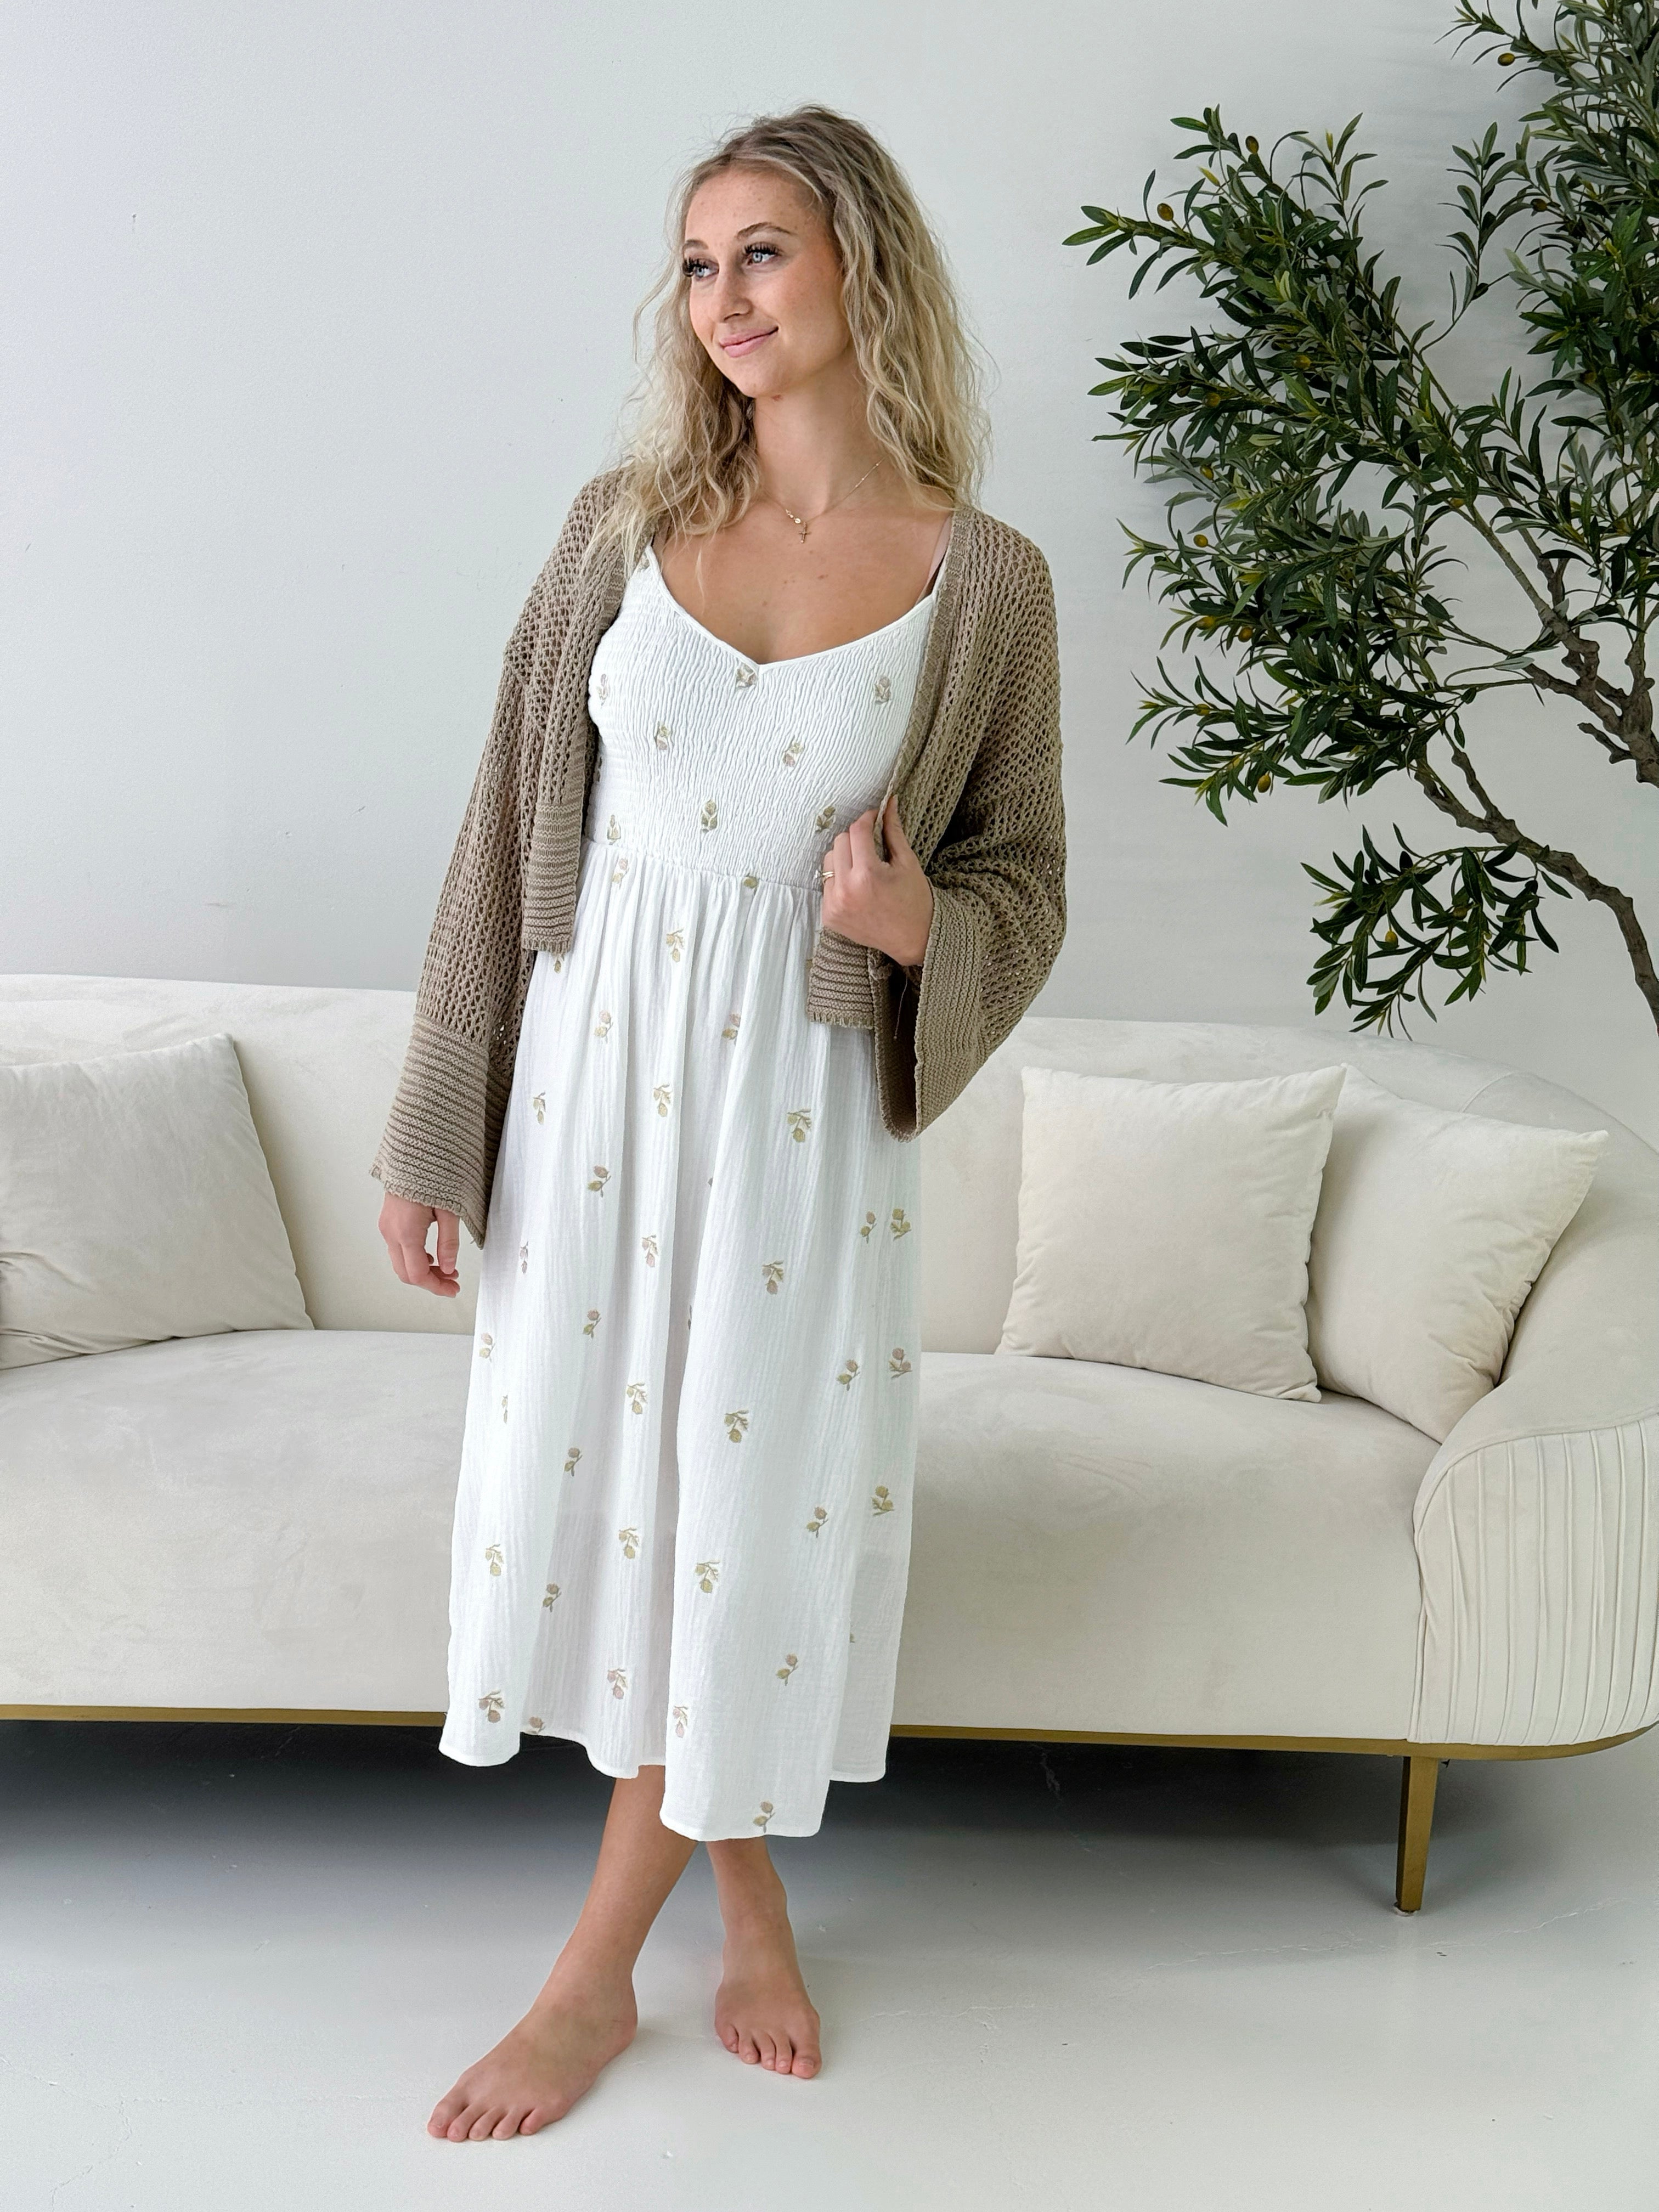 Mary Beth Embroidered Dress in Off White-152 Dresses - Long-Little Bird Boutique